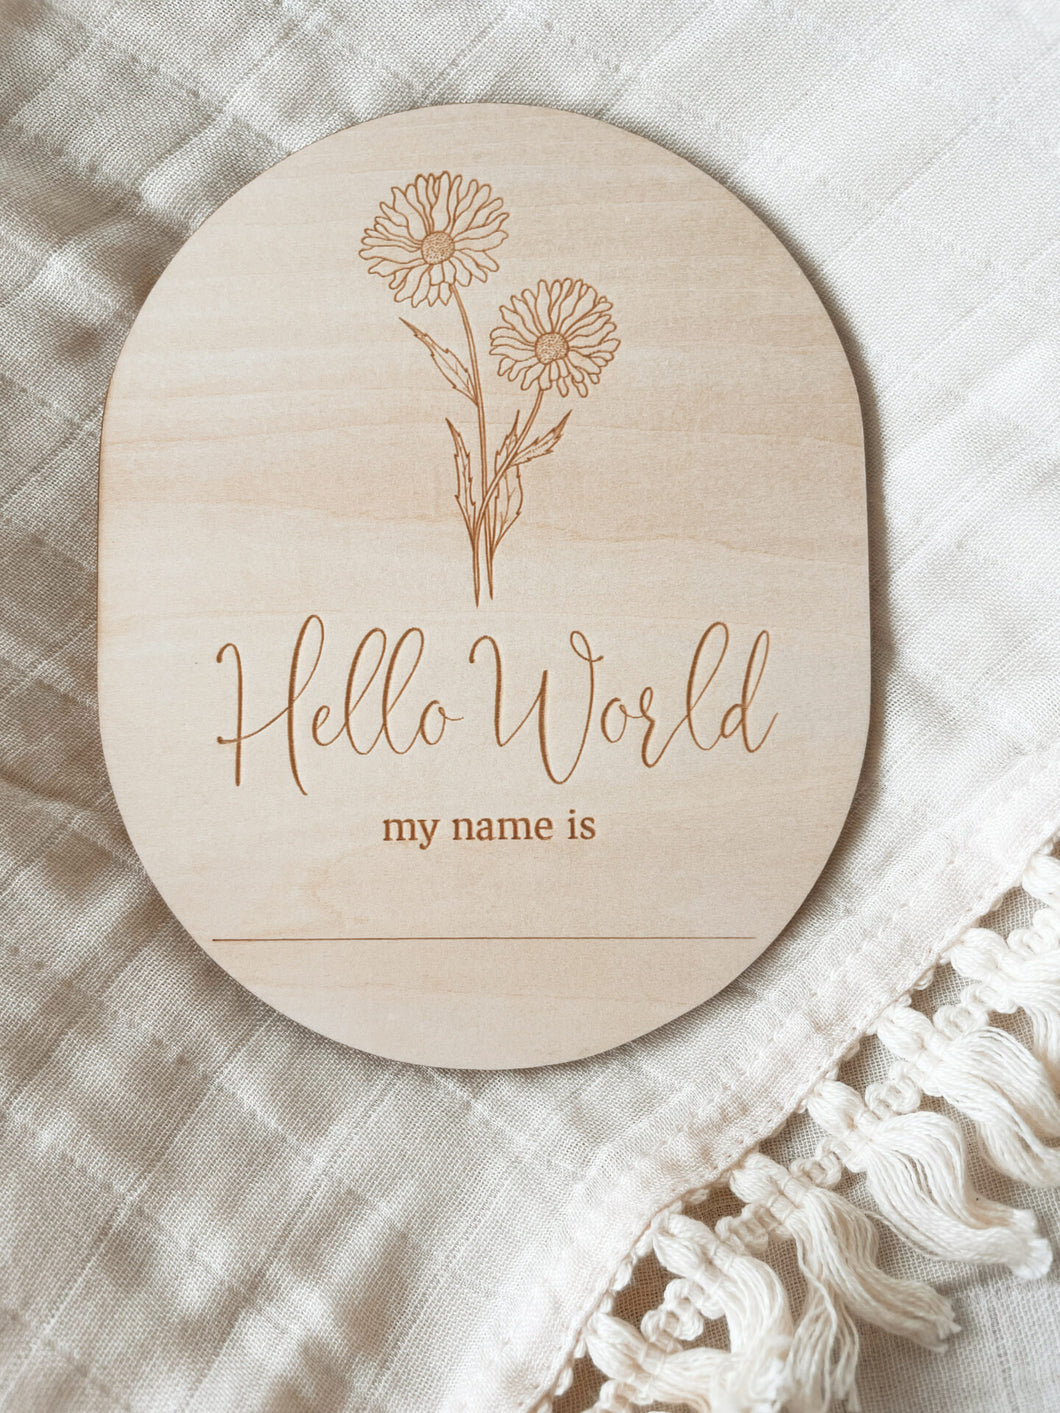 Hello World My Name is